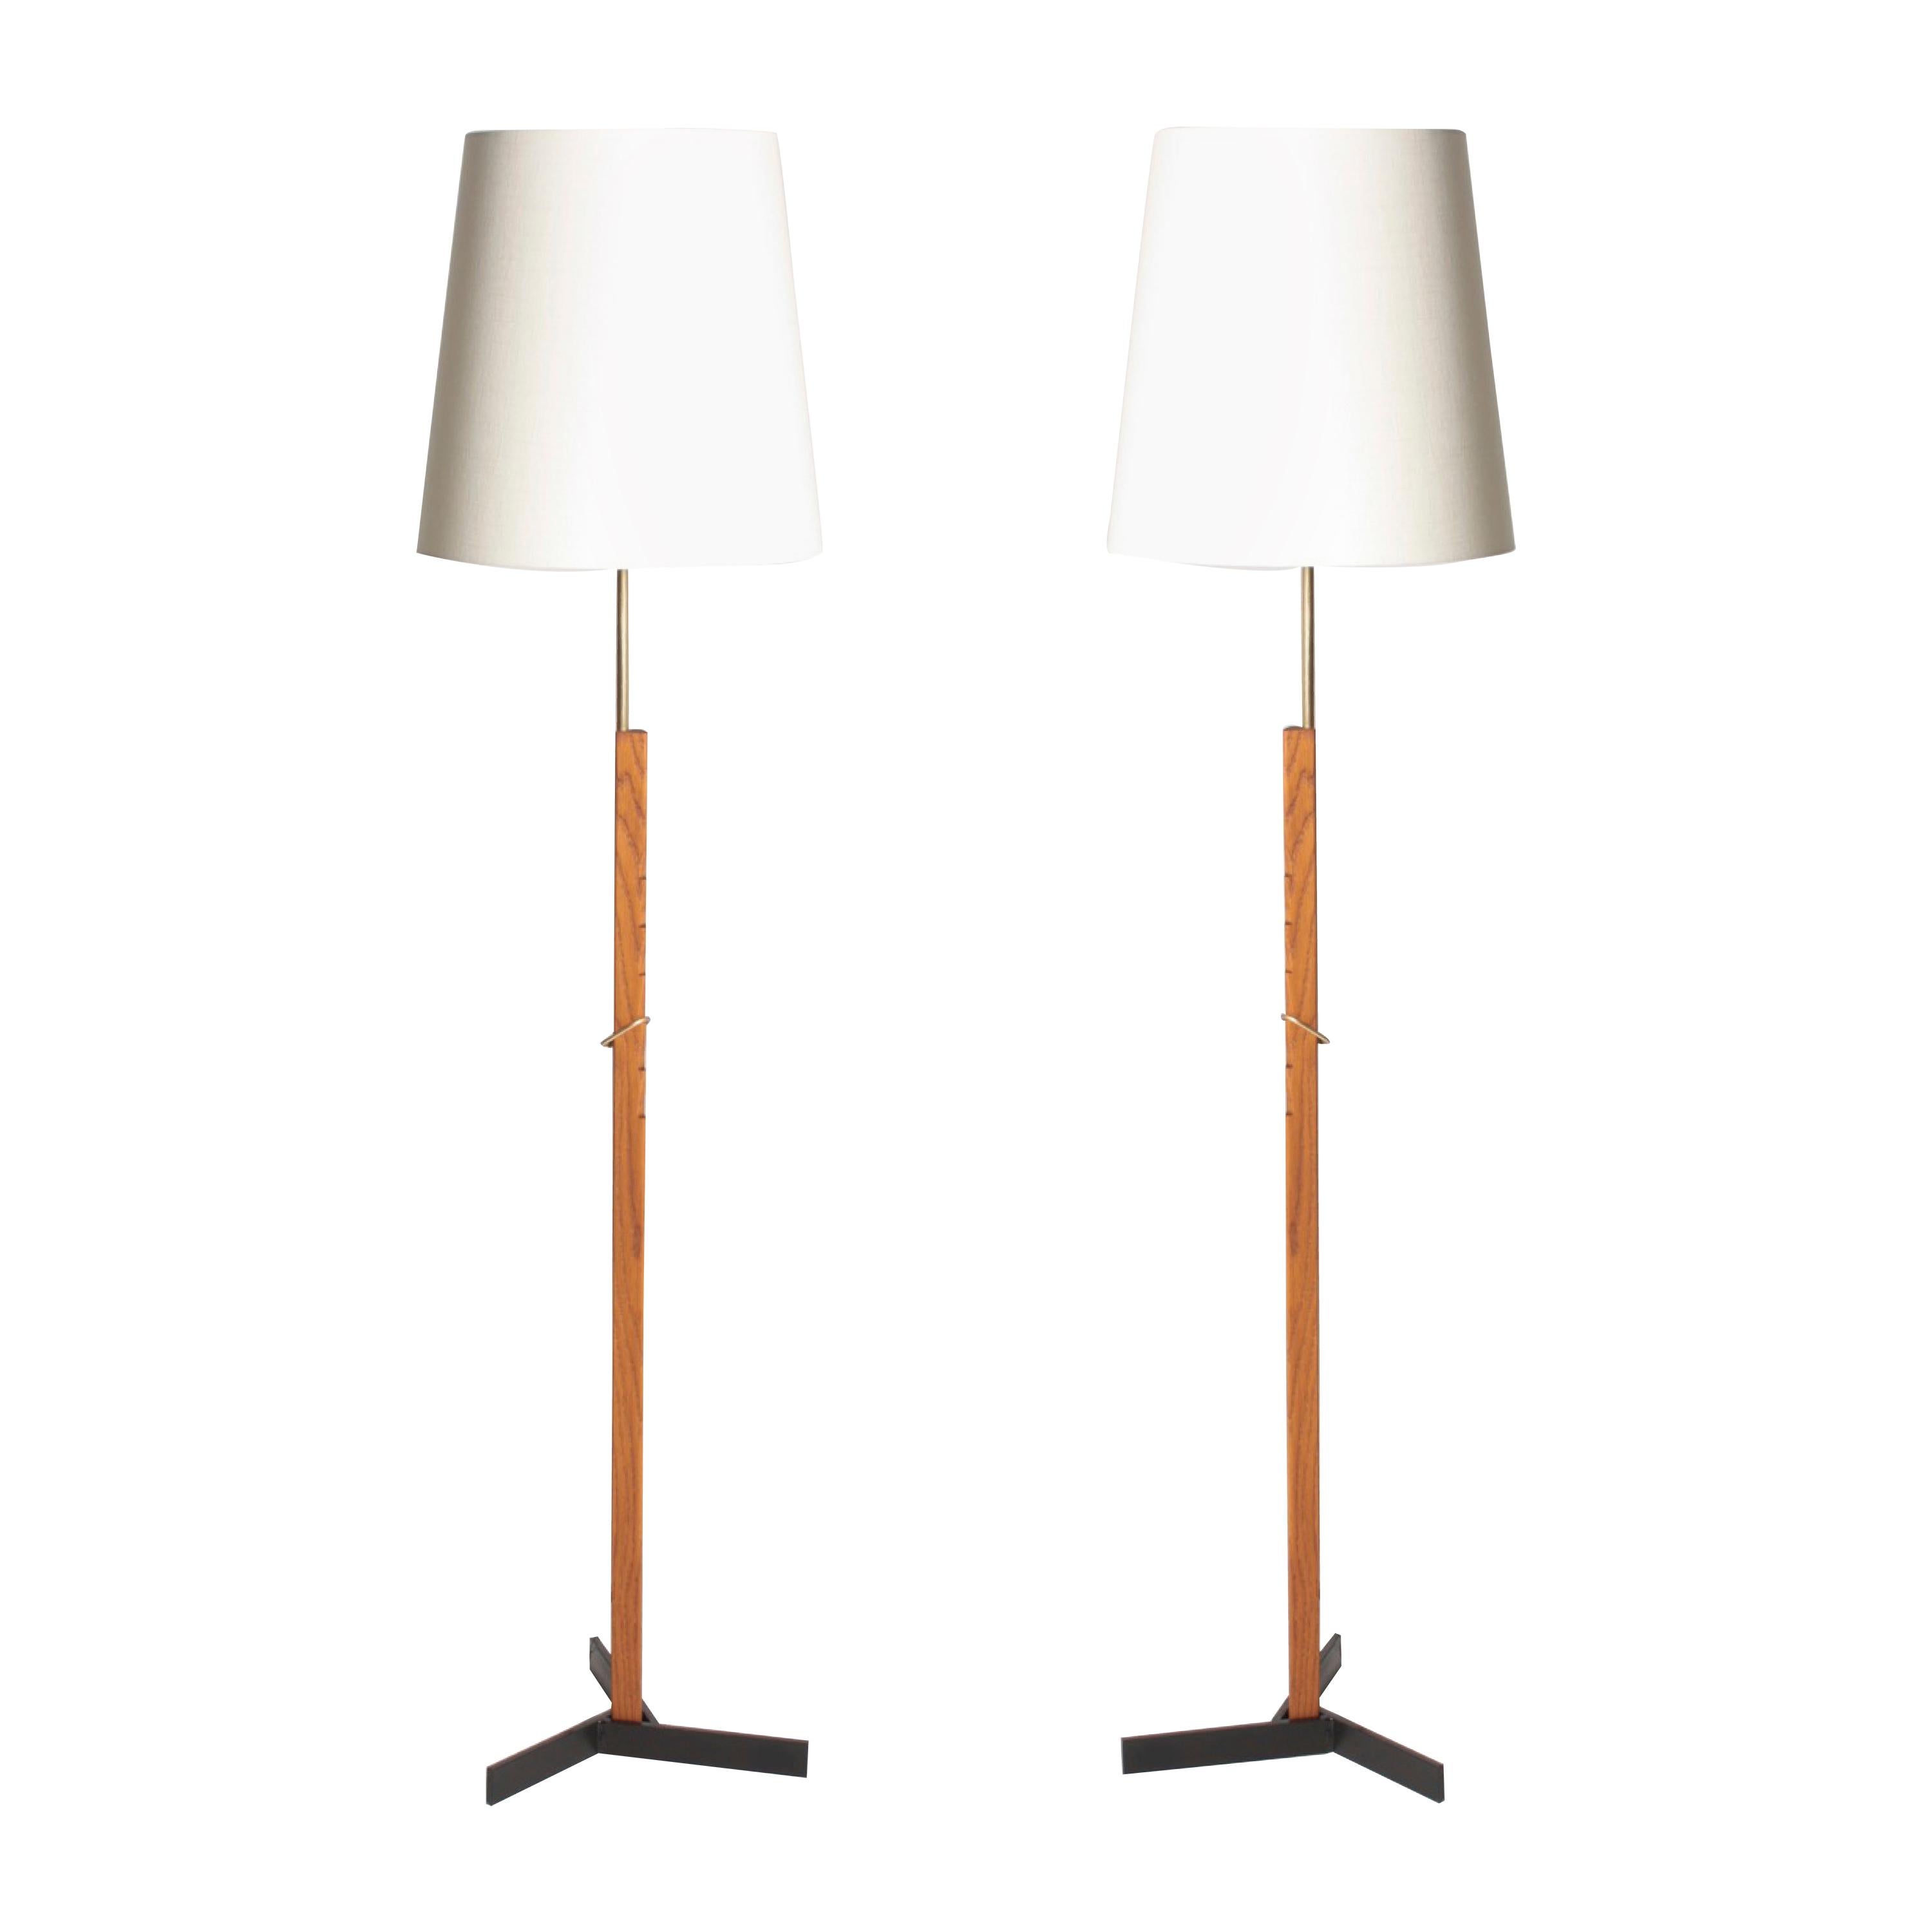 Pair of Midcentury Floor Lamps in Oak and Brass by Holm Sorensen, Denmark, 1950s For Sale